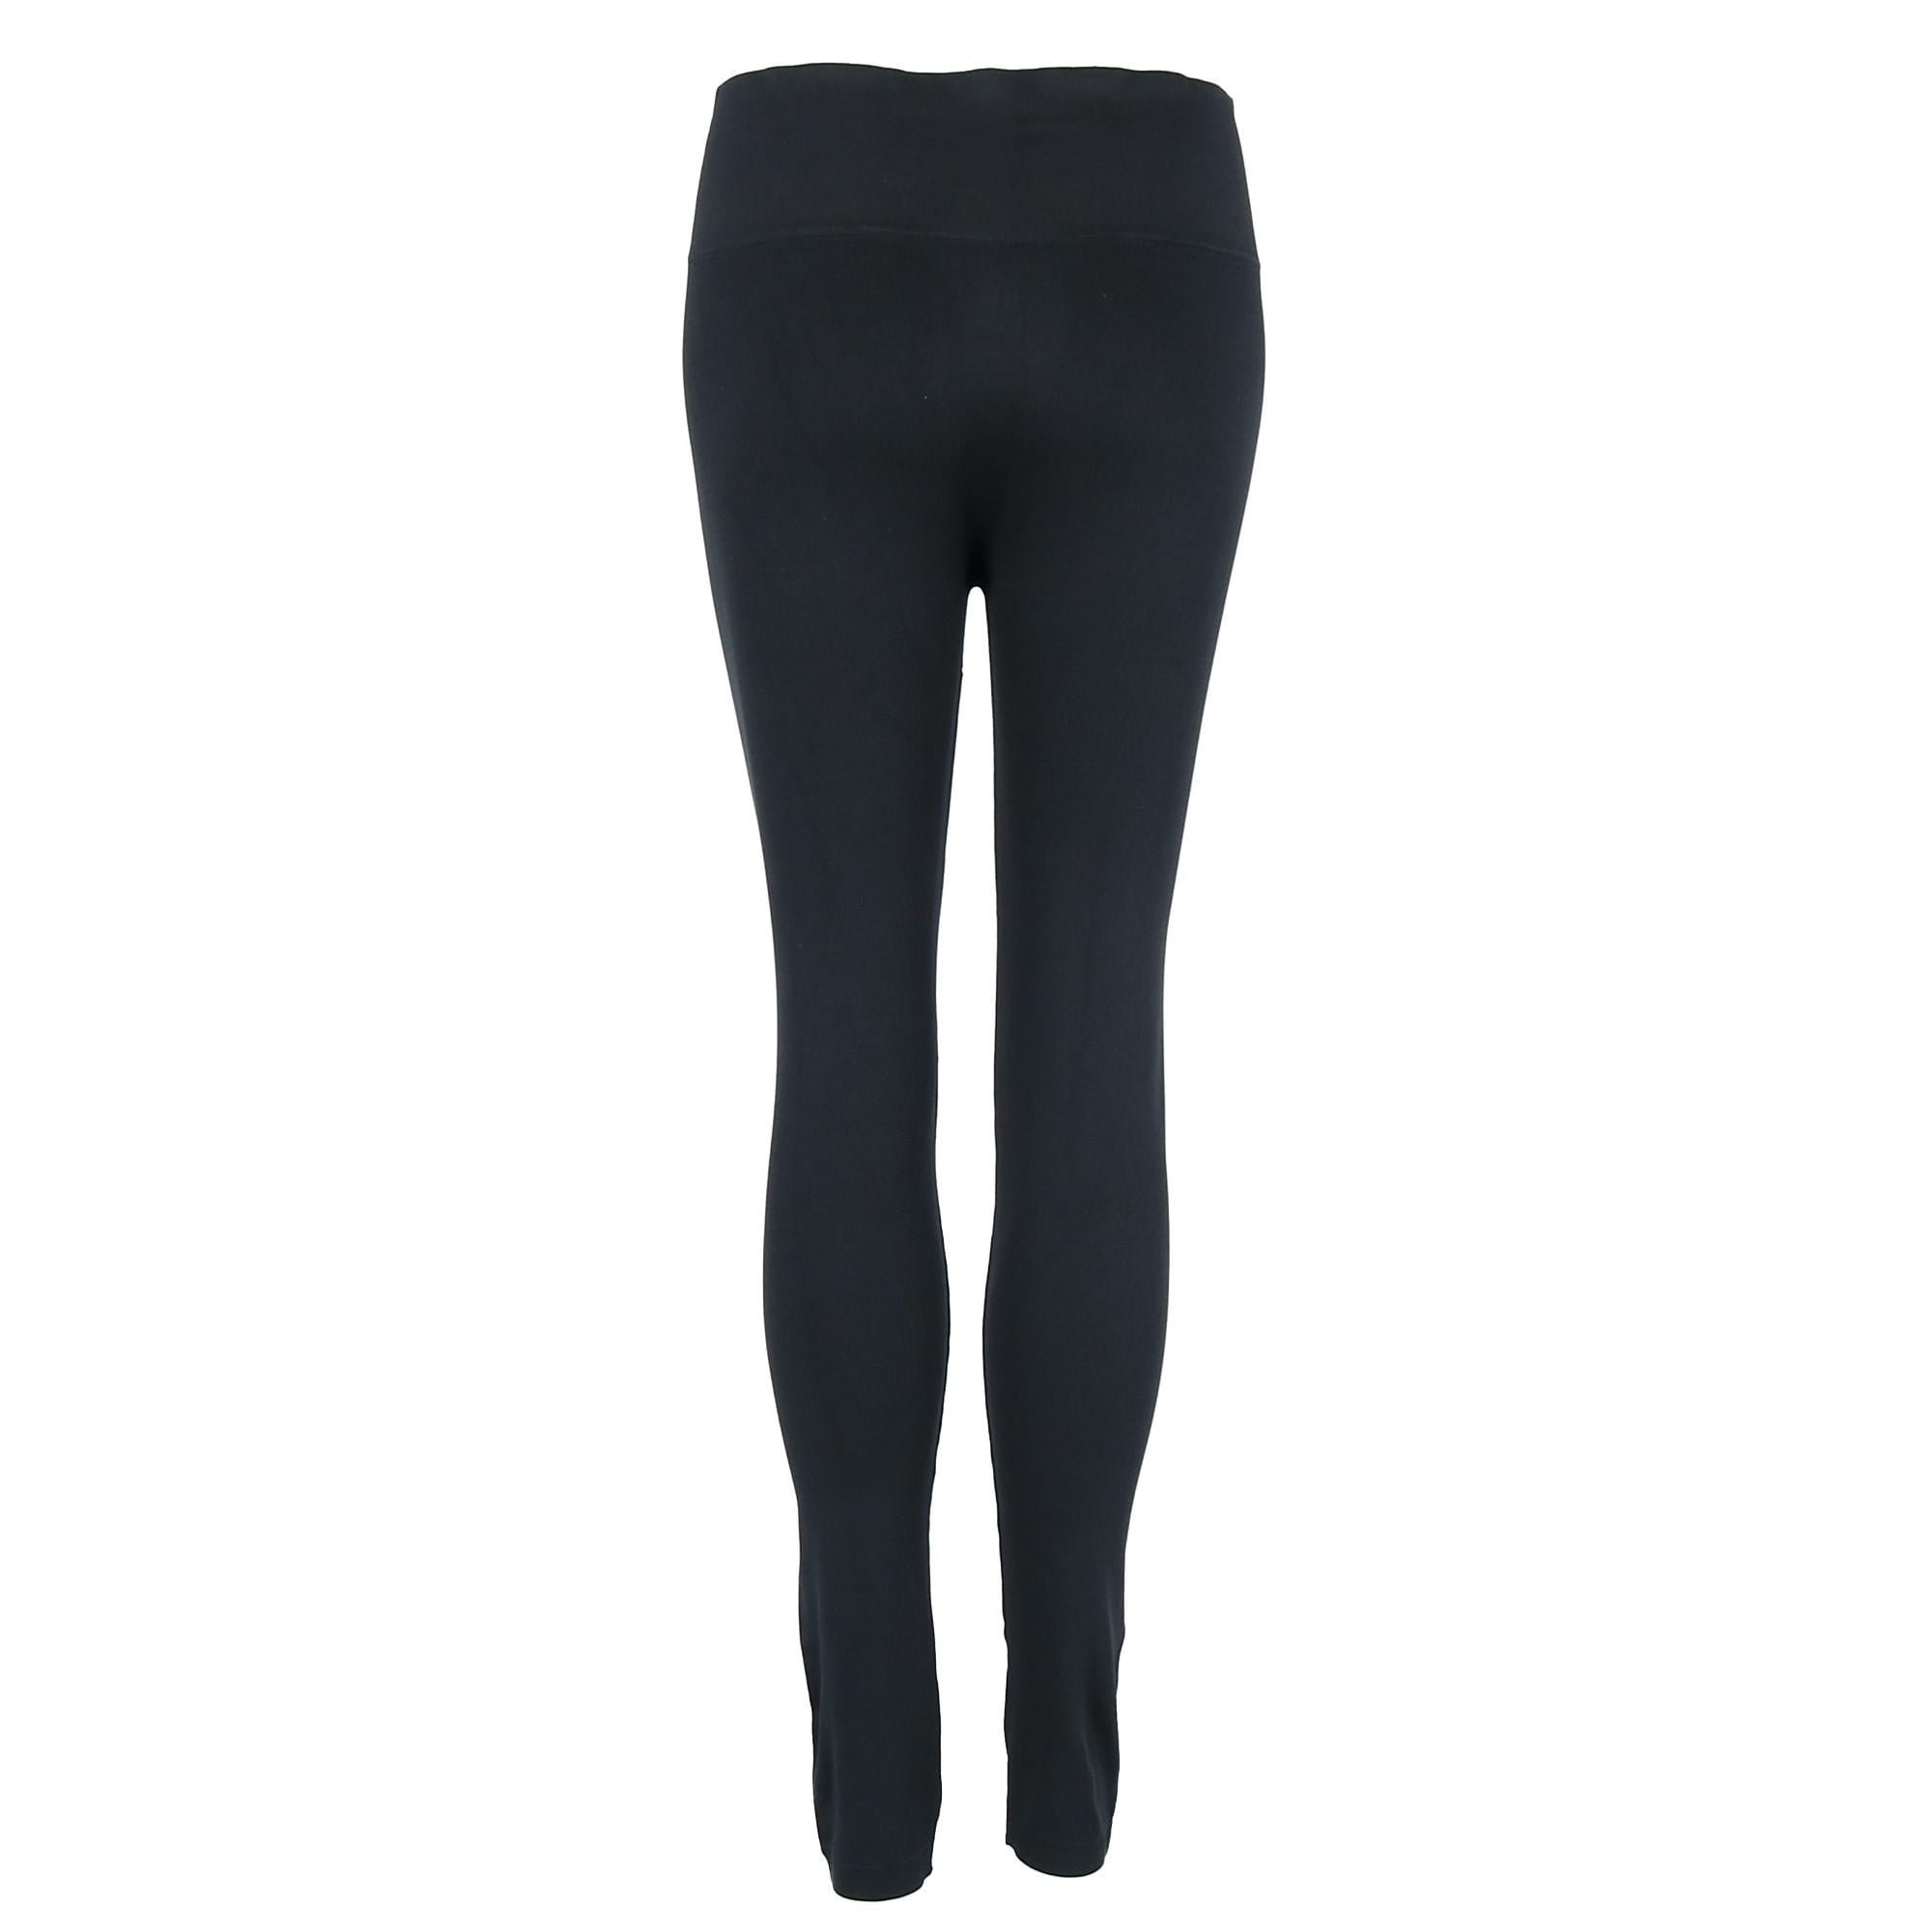 Just One Women's High Waisted Tummy Control Plus Size Leggings